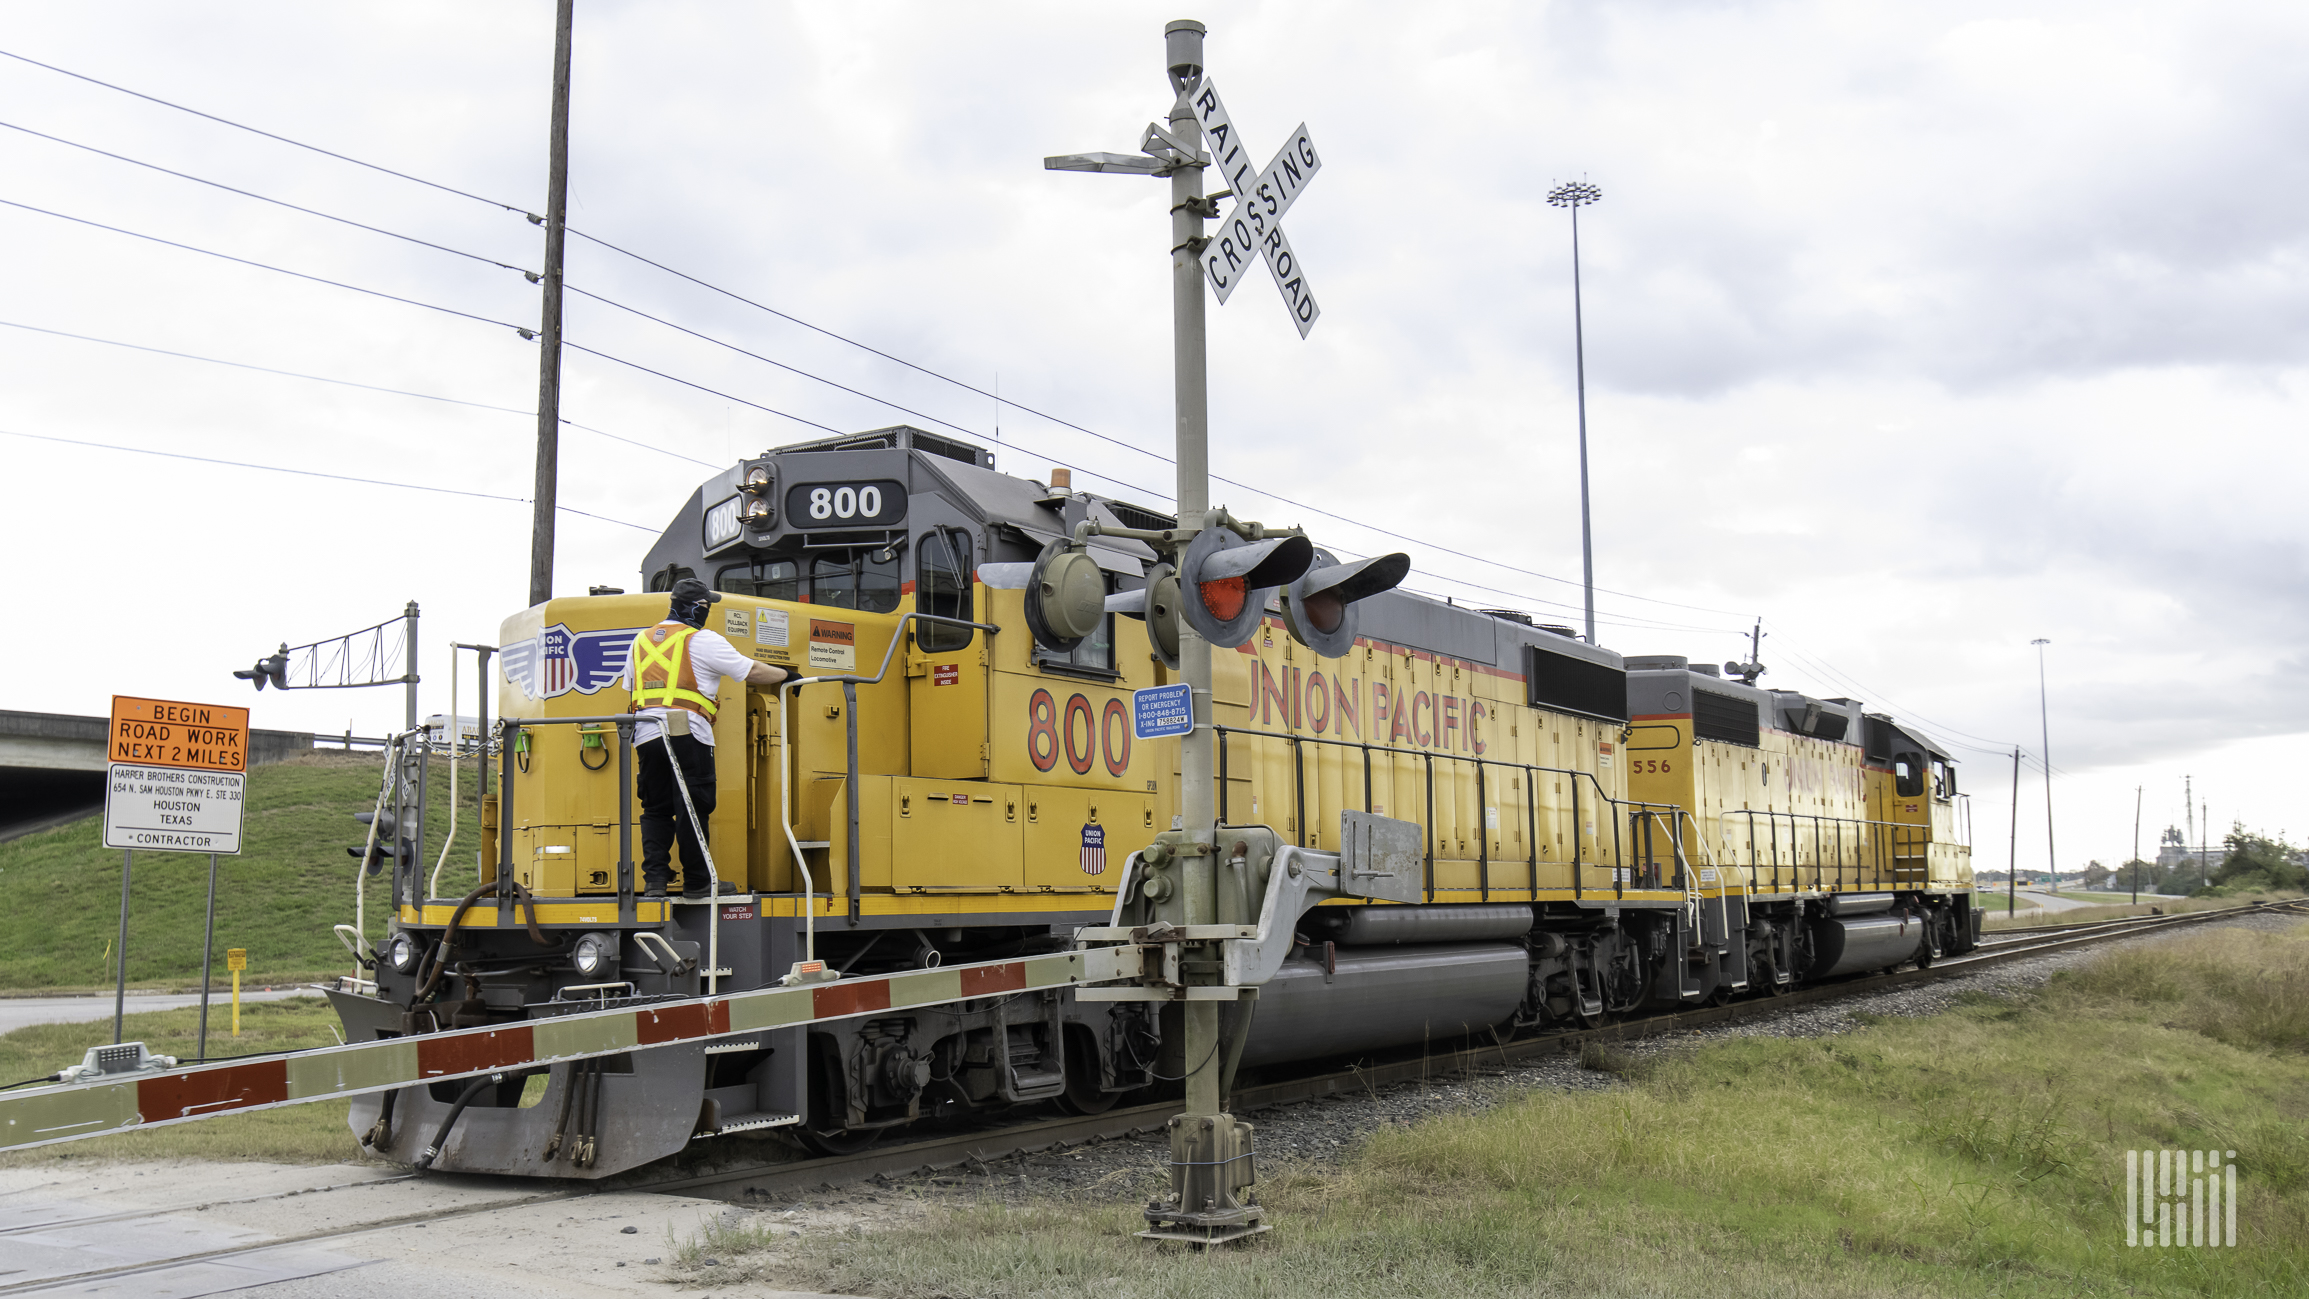 Union Pacific railroad to renew push for 1-person crews by testing  conductors in trucks